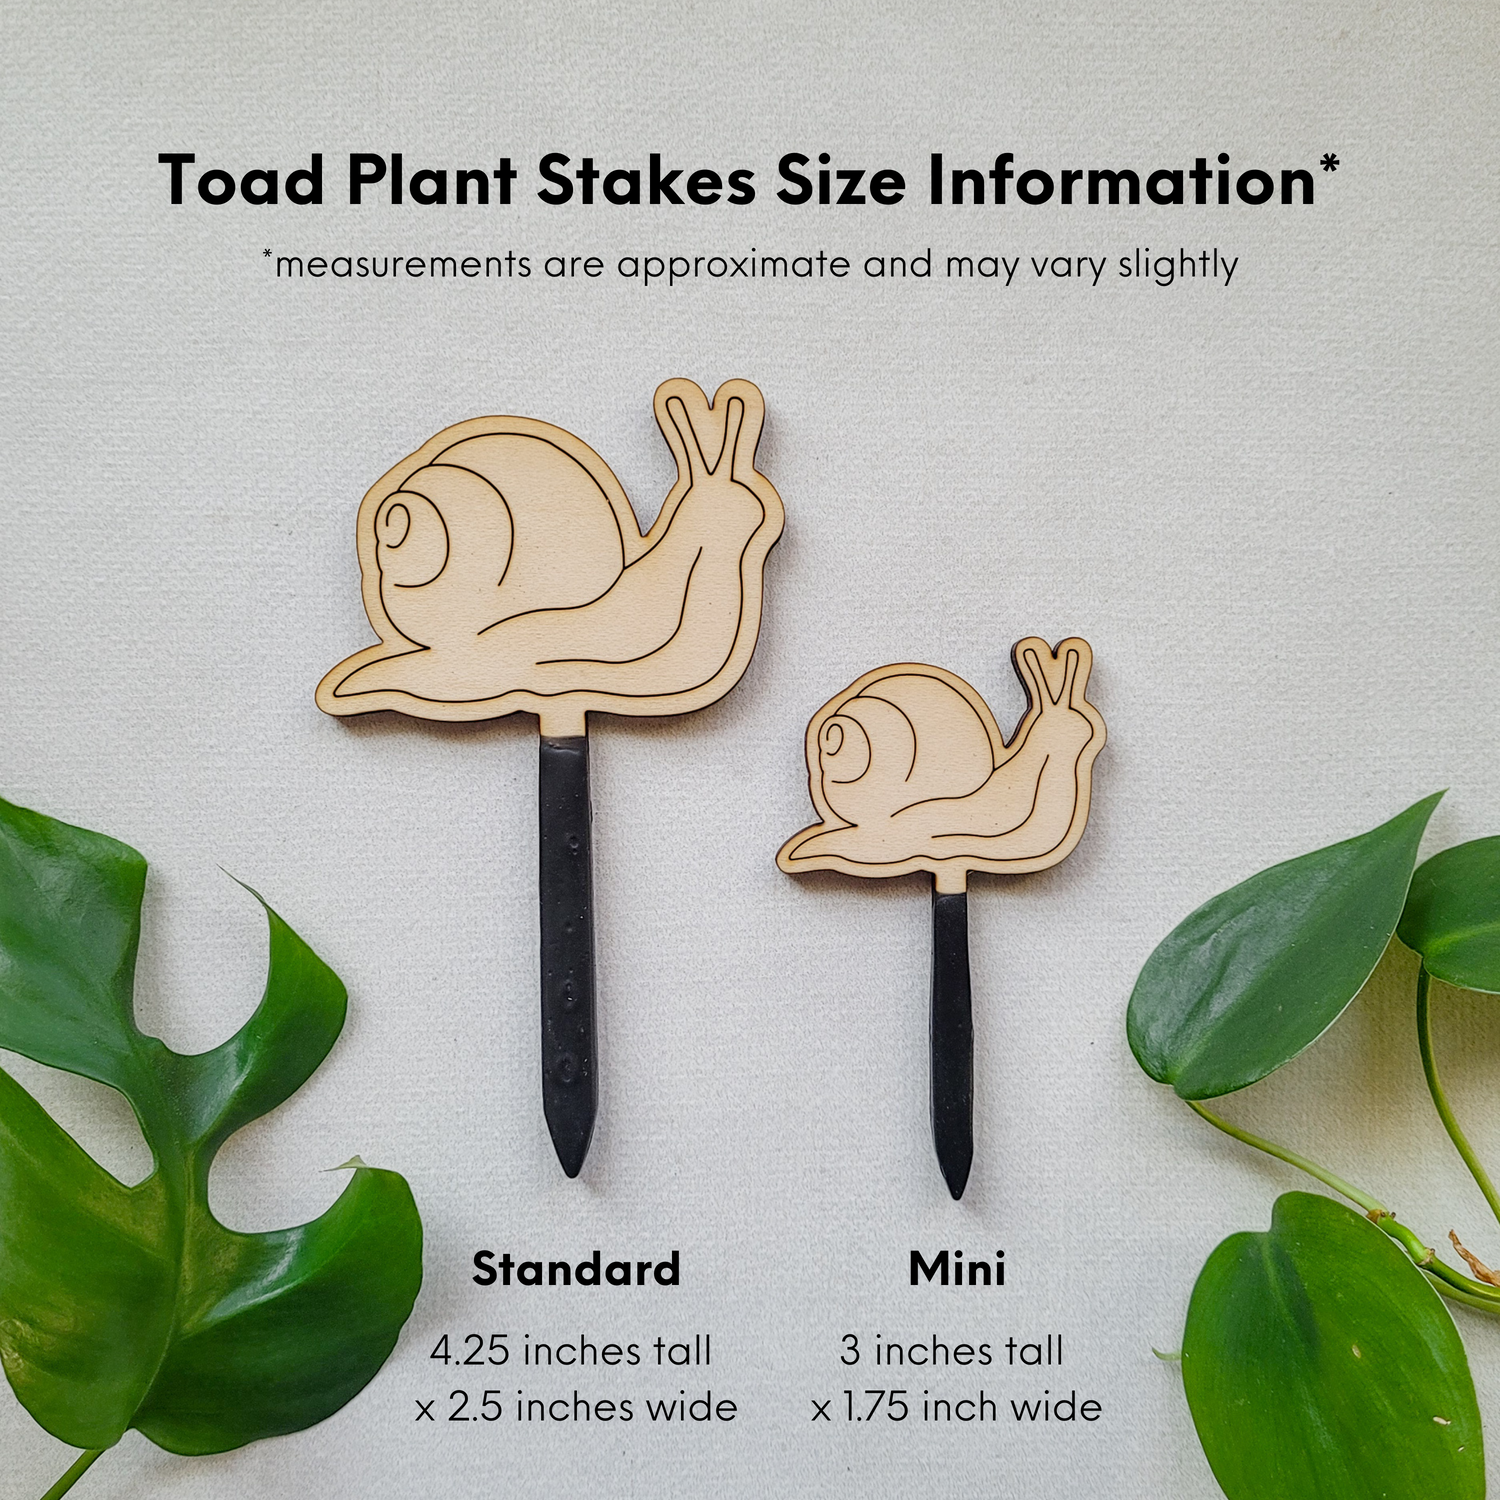 Size chart for snail decorative plant stakes. Two size options against a white background with measurement labels reflecting those in the written description.